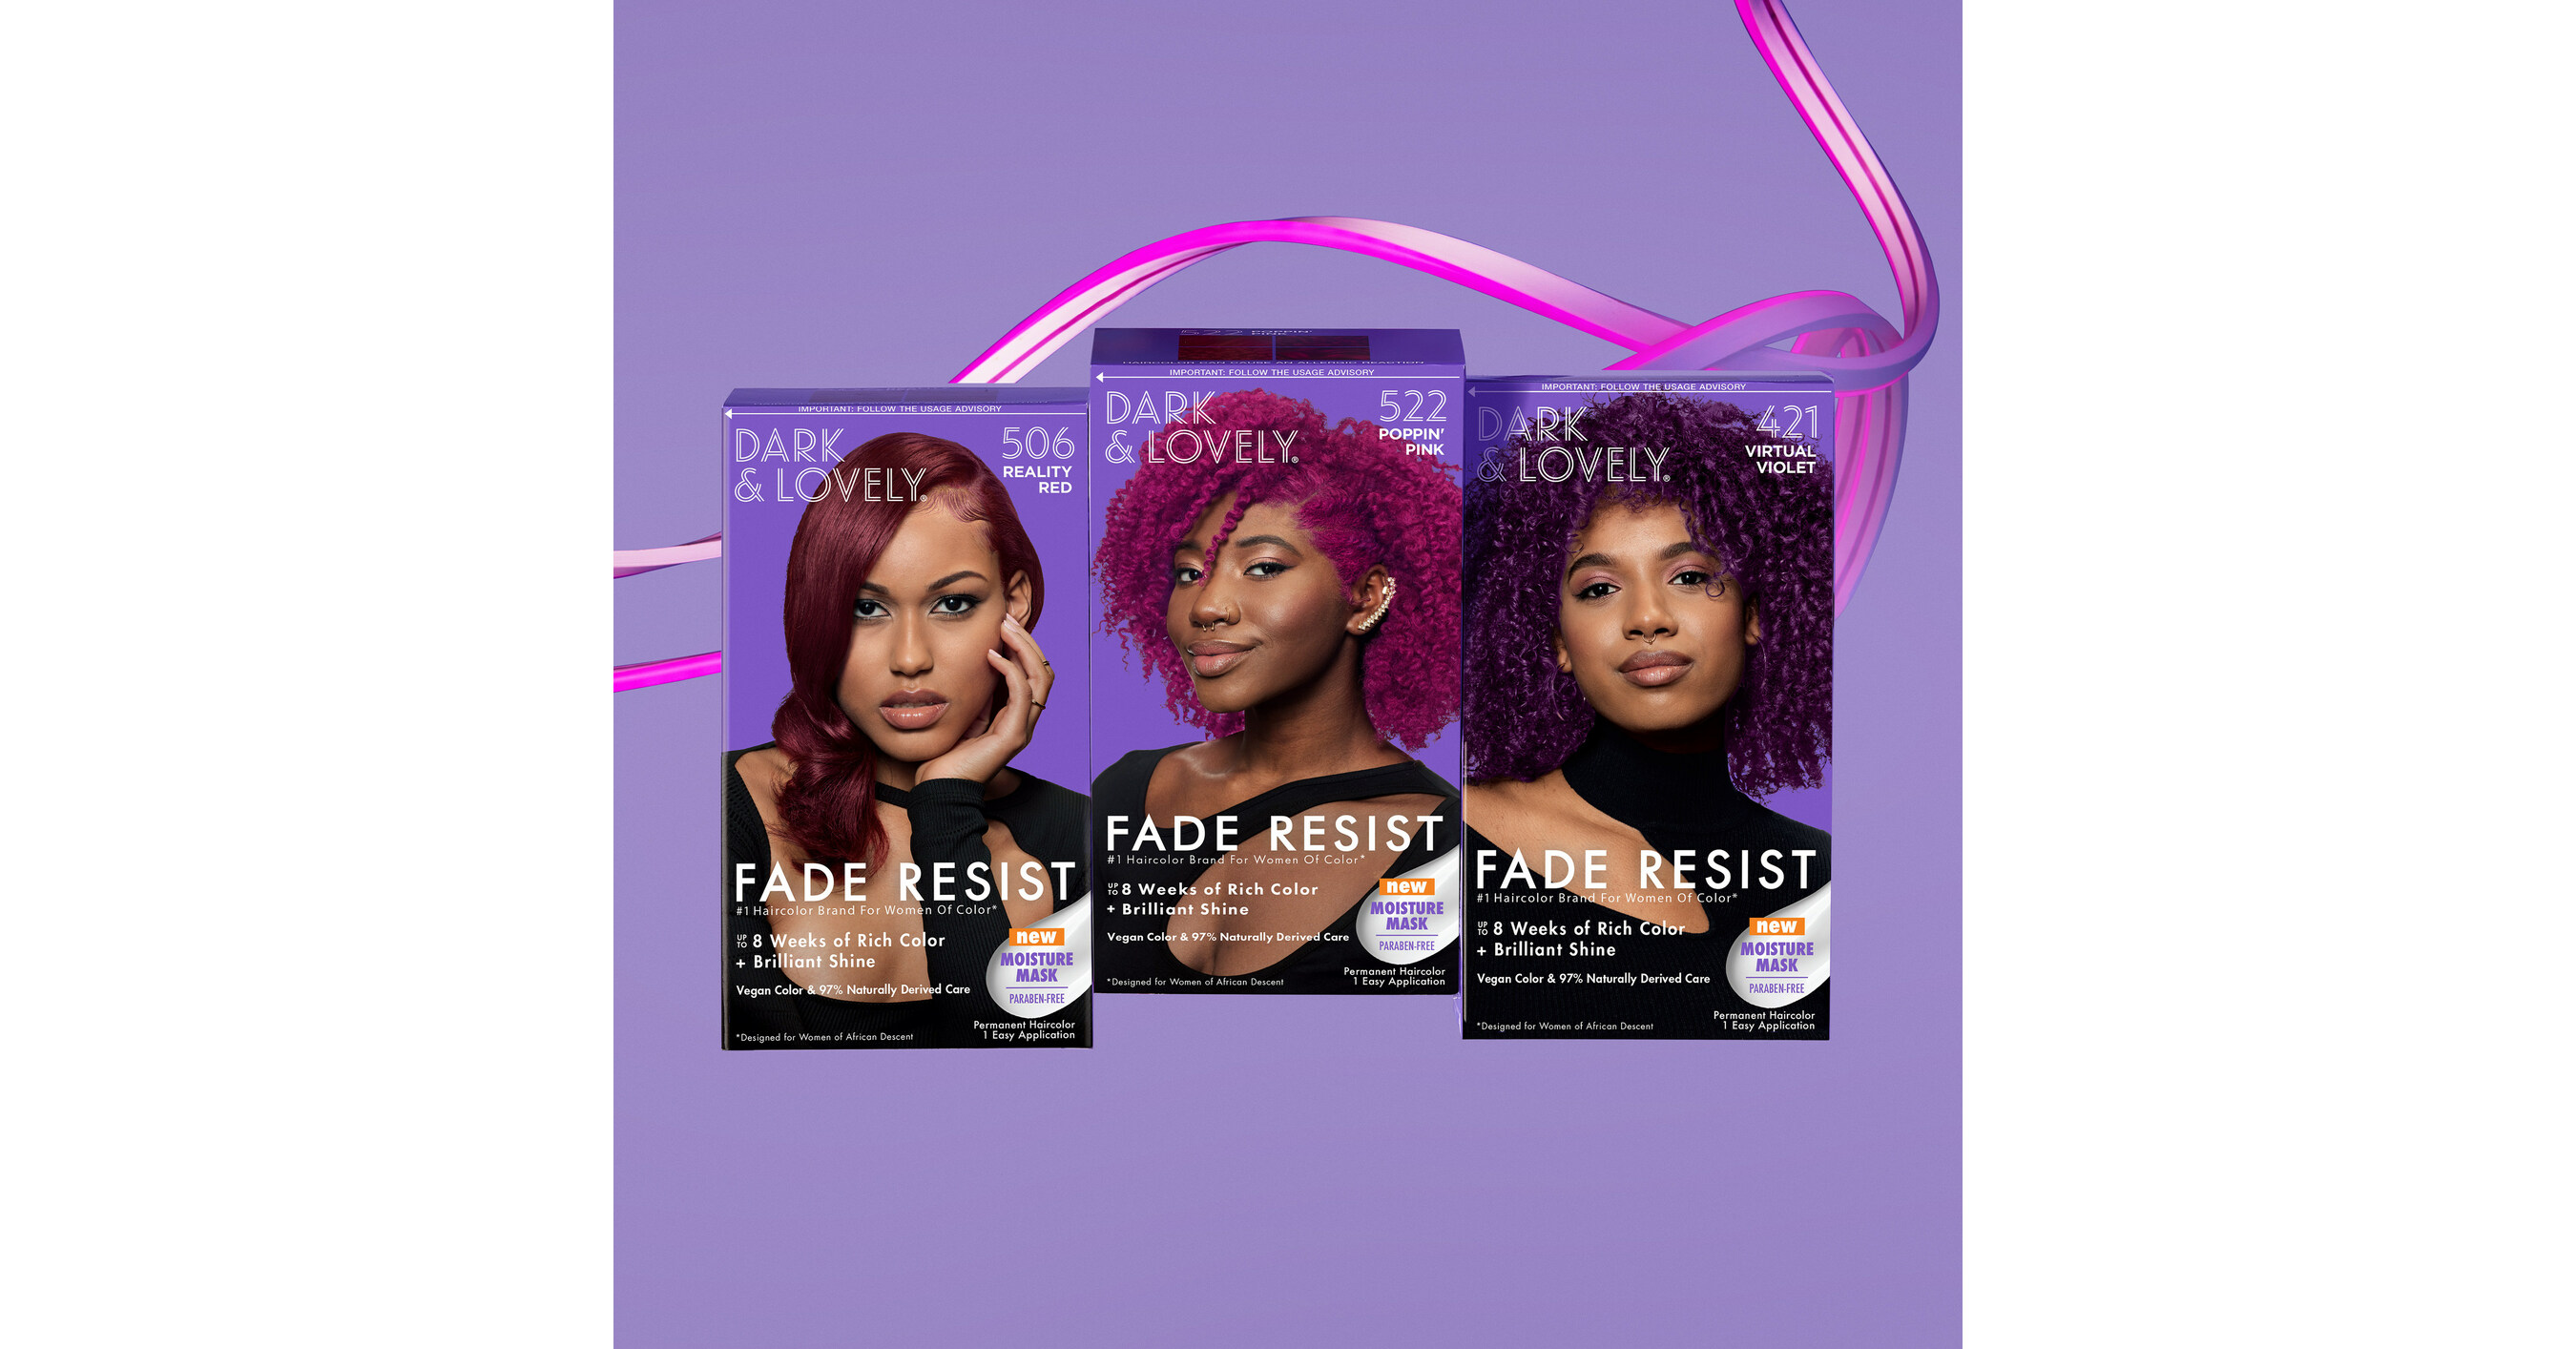 DARK & LOVELY LAUNCHES ‘PLAY IN COLOR’ CAMPAIGN IN CELEBRATION OF BLACK BEAUTY AND EXPRESSION